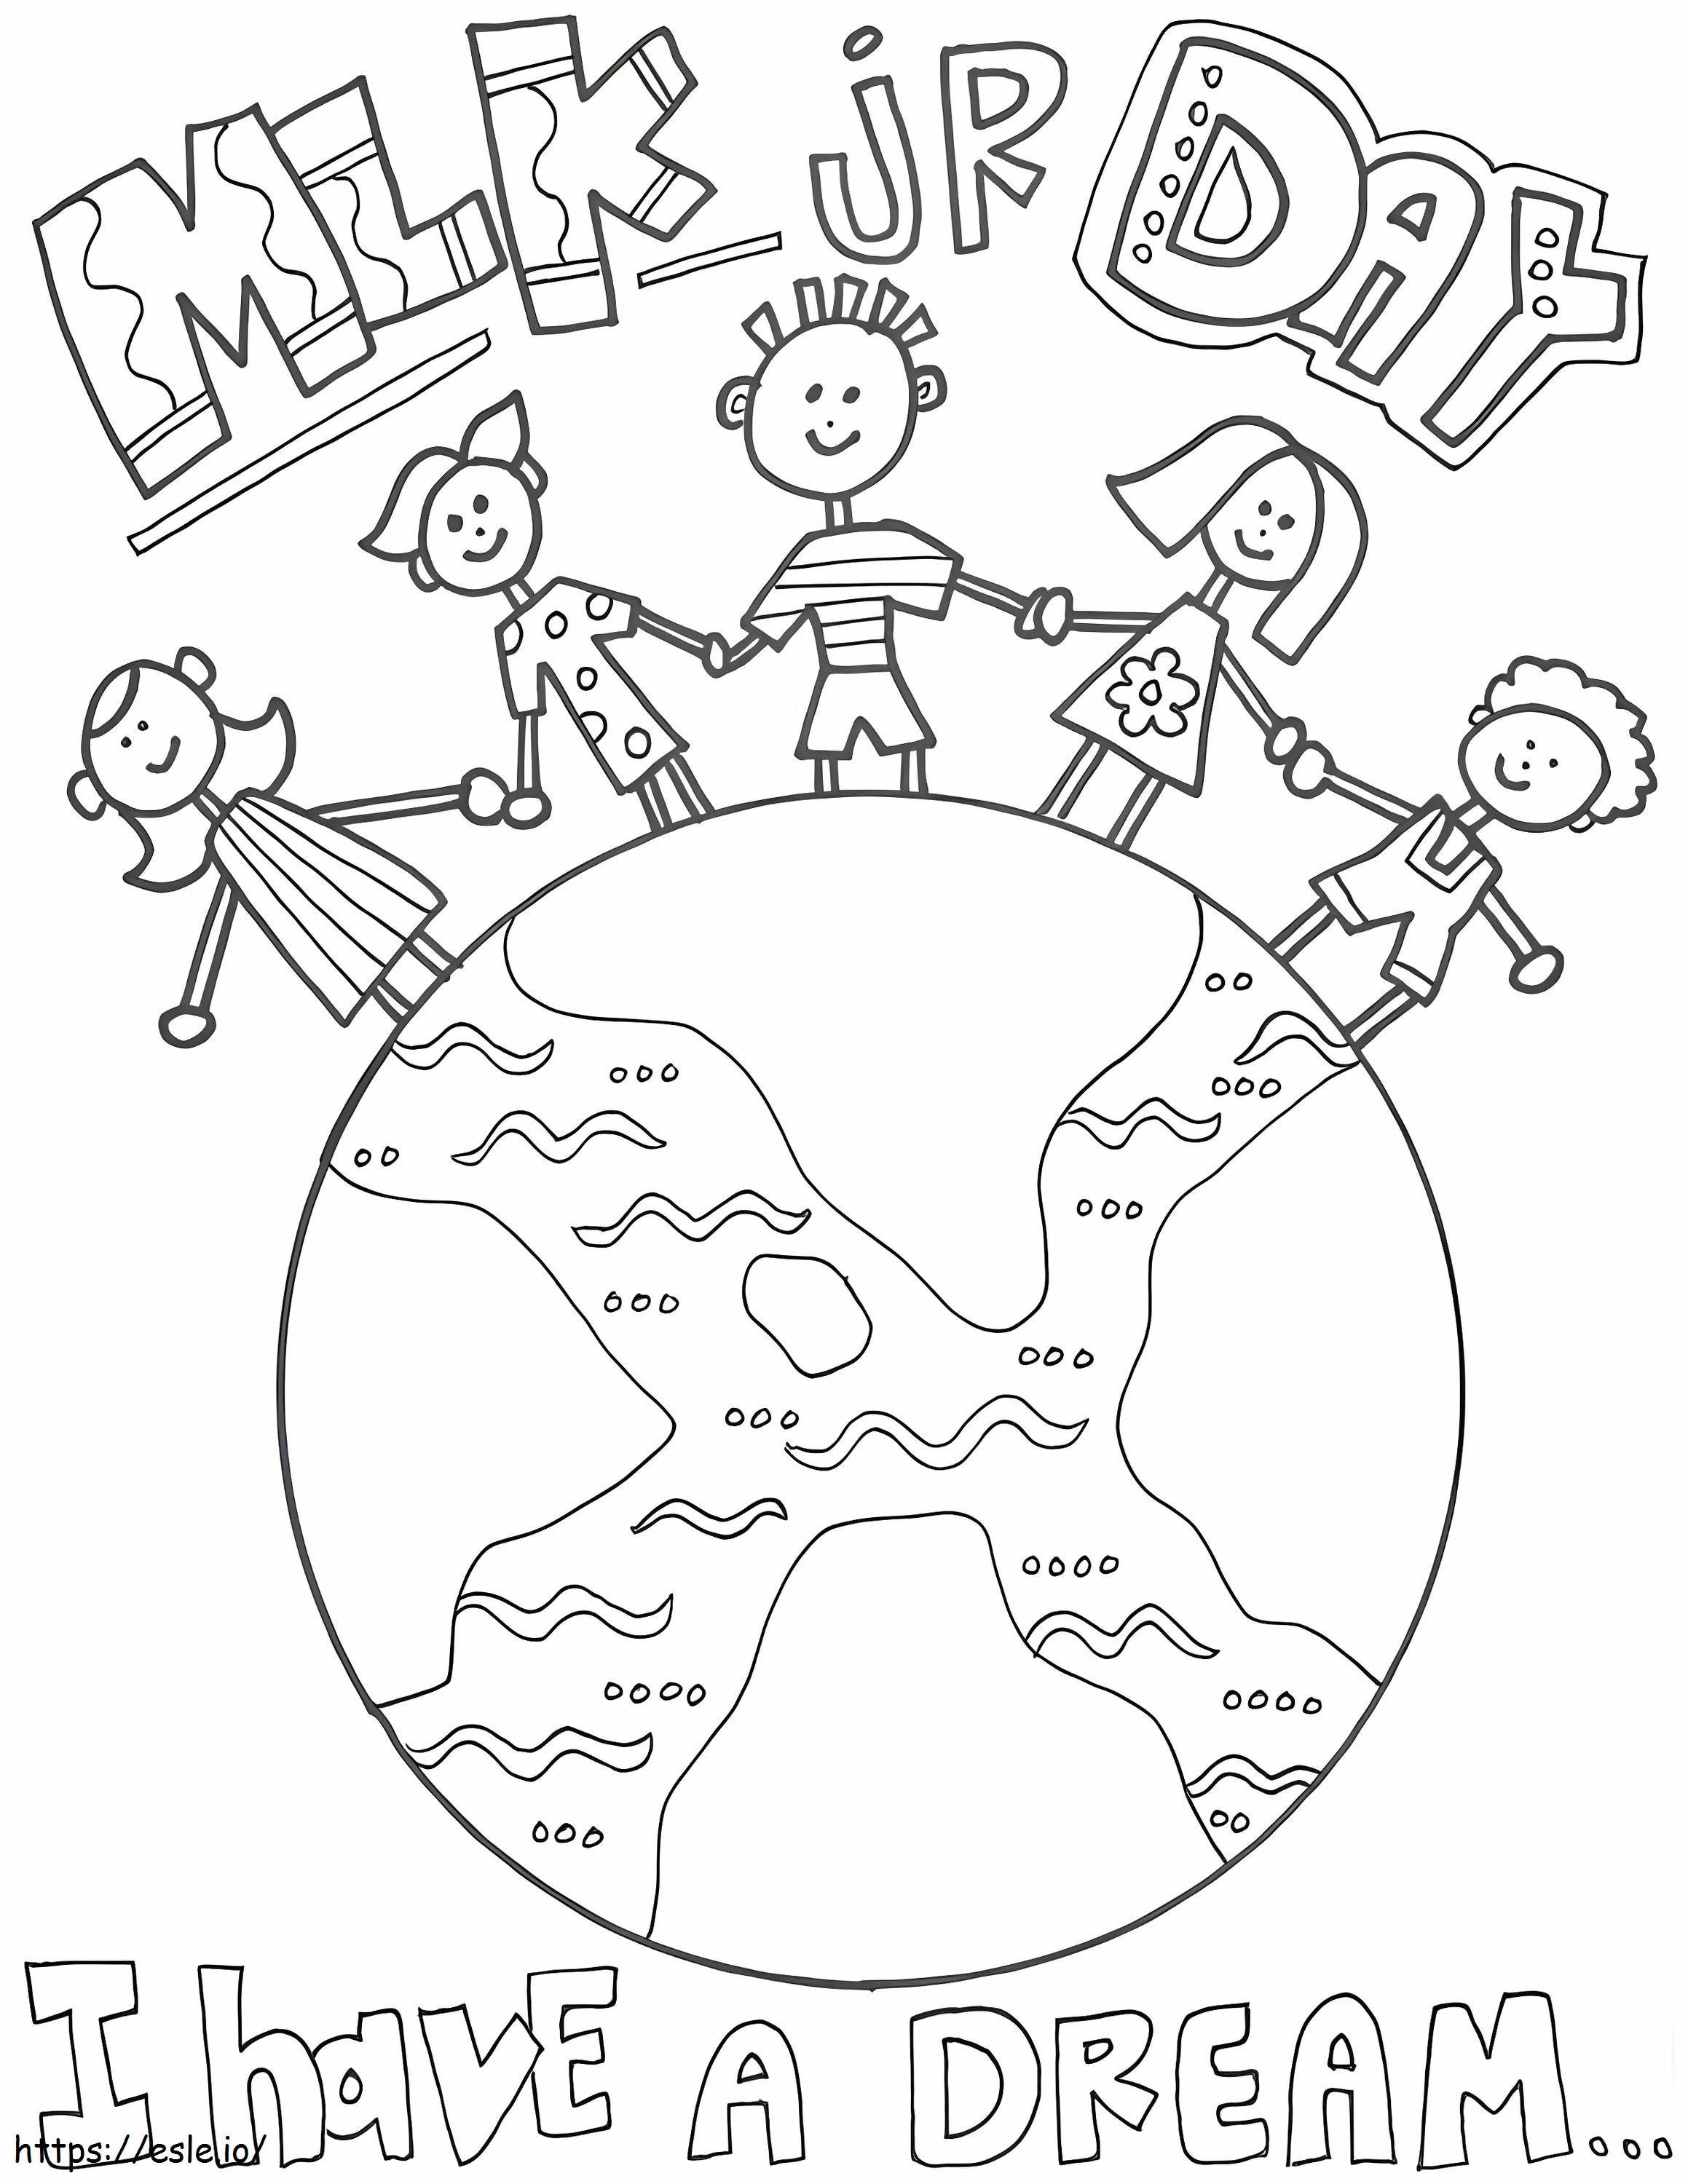 Martin Luther King Jr. Day 1 coloring page